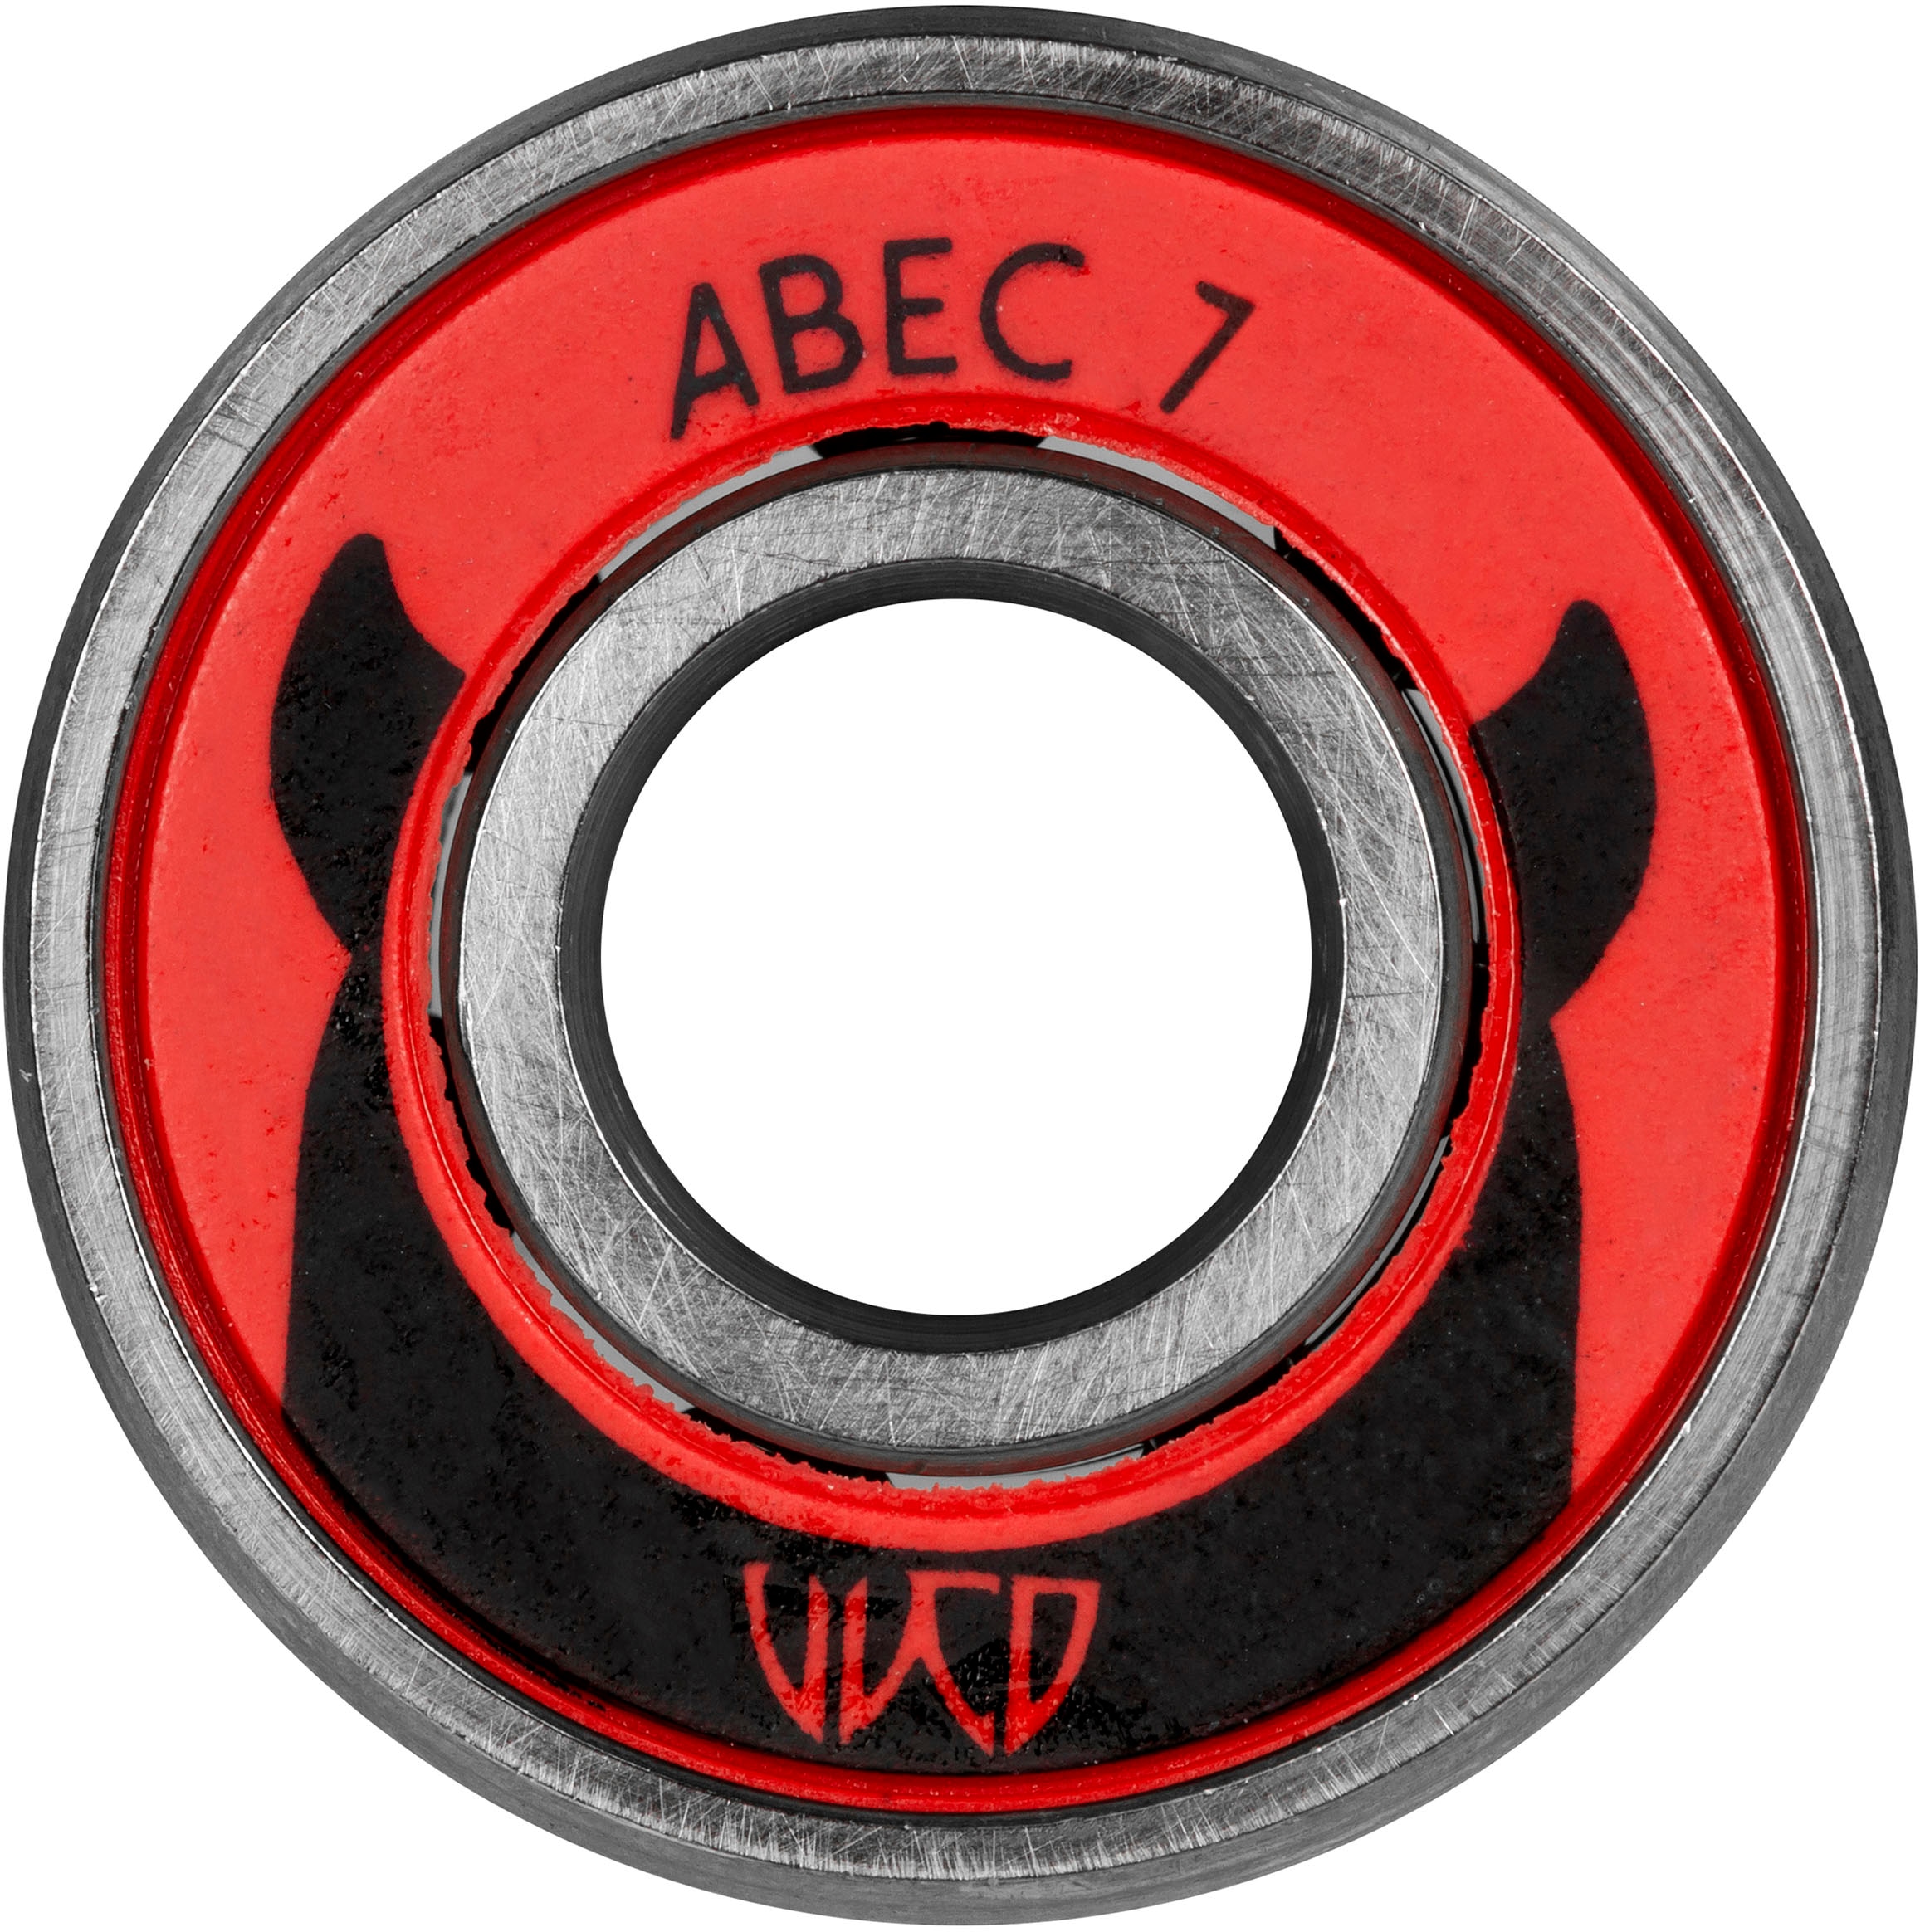 Wicked Kugellager "ABEC 7 Freespin - 16-pack", (Packung, 16 St.)